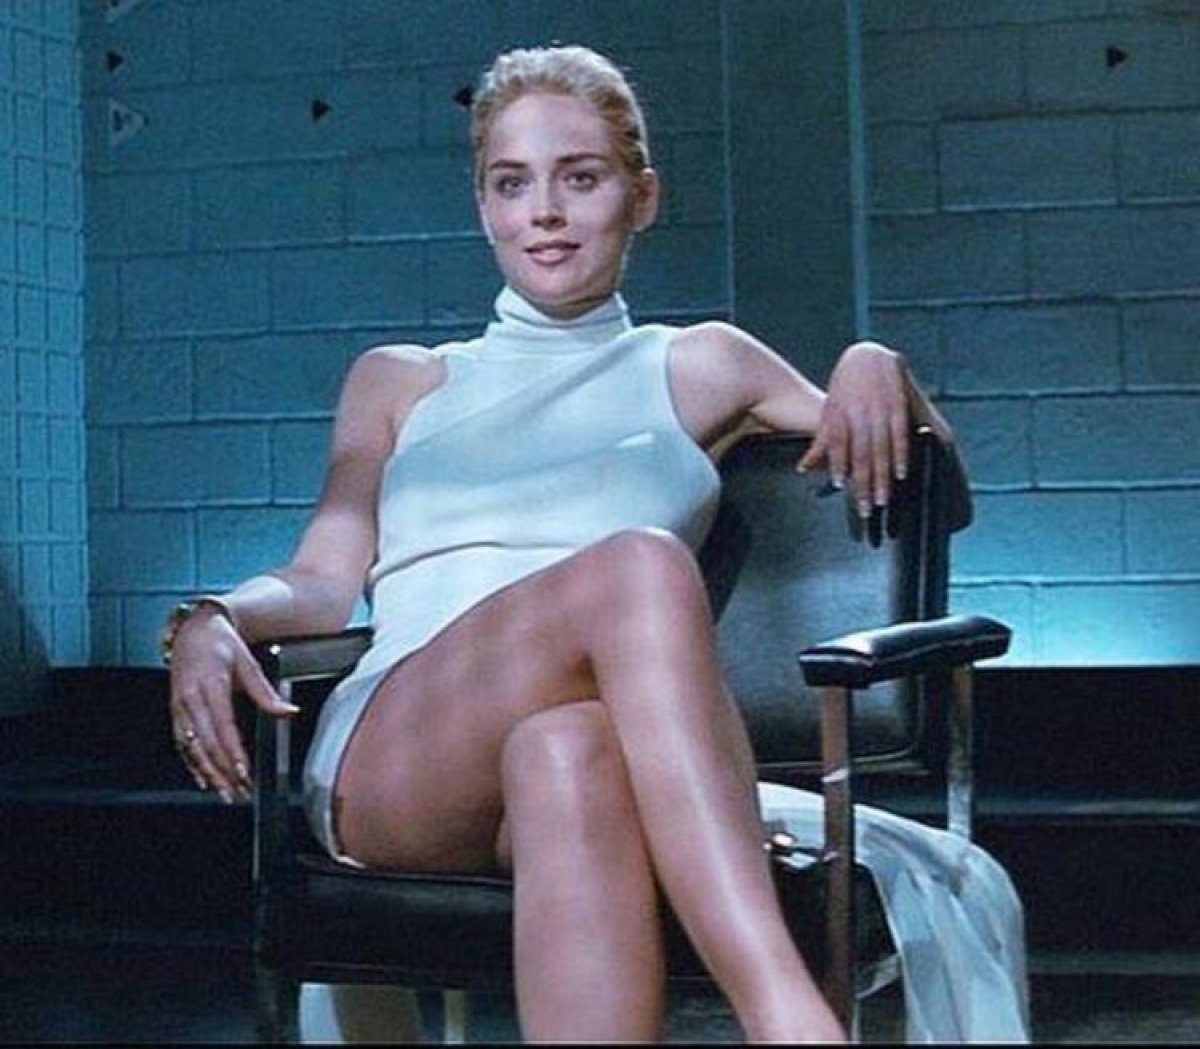 Confession #1 from Basic Instinct star Sharon Stone years later